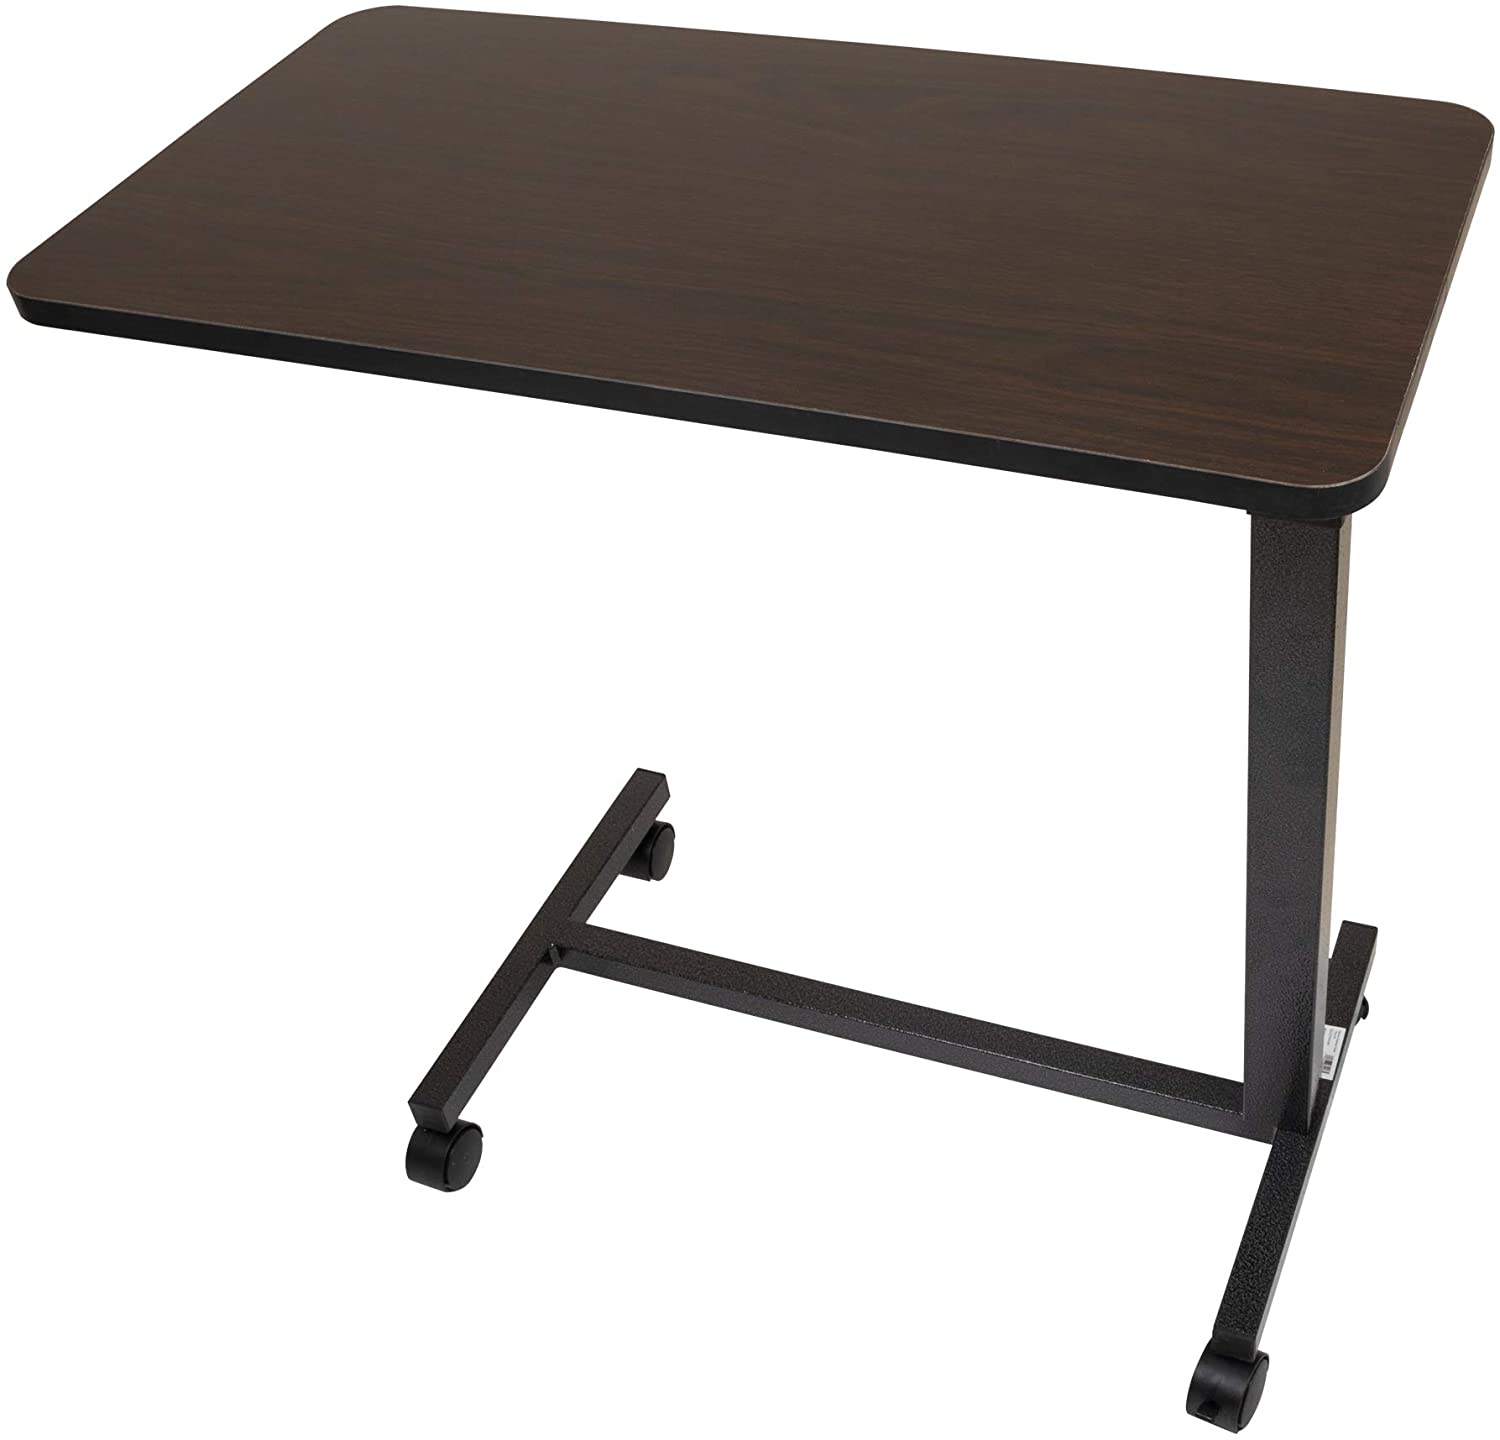 Roscoe Medical Bed Tray Overbed Table